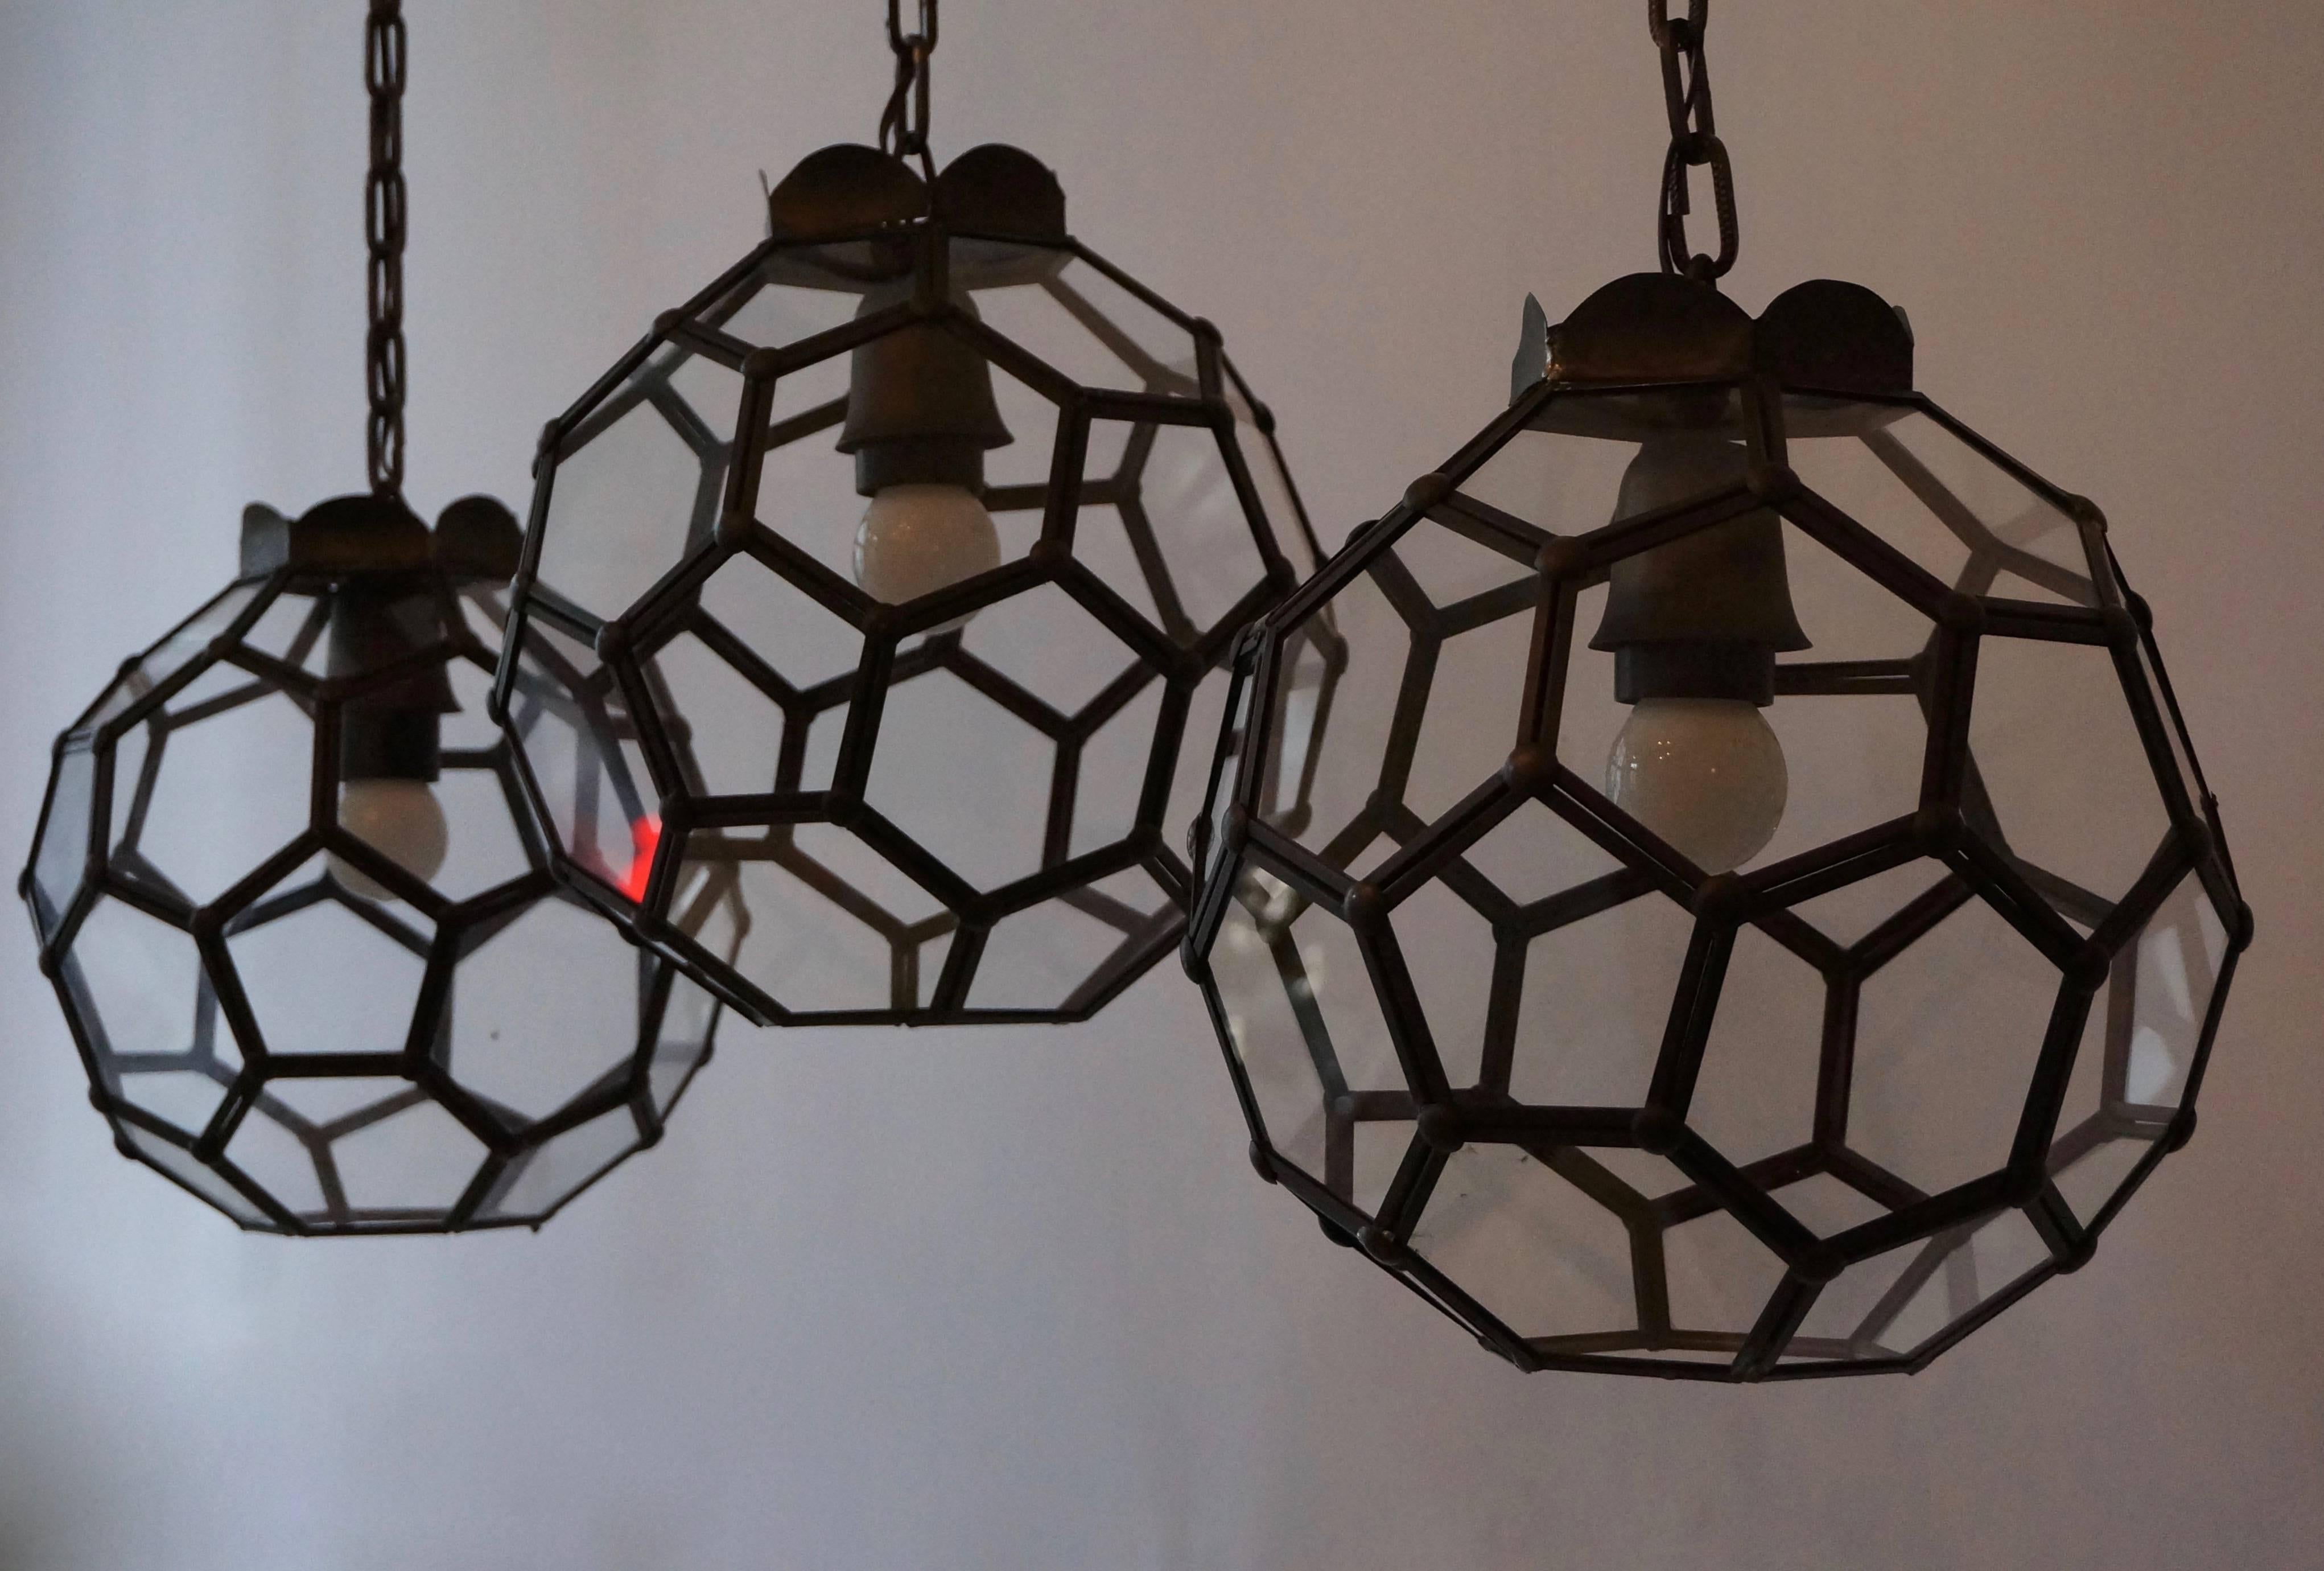 Two Italian stained glass pendant lights.
Price per item.